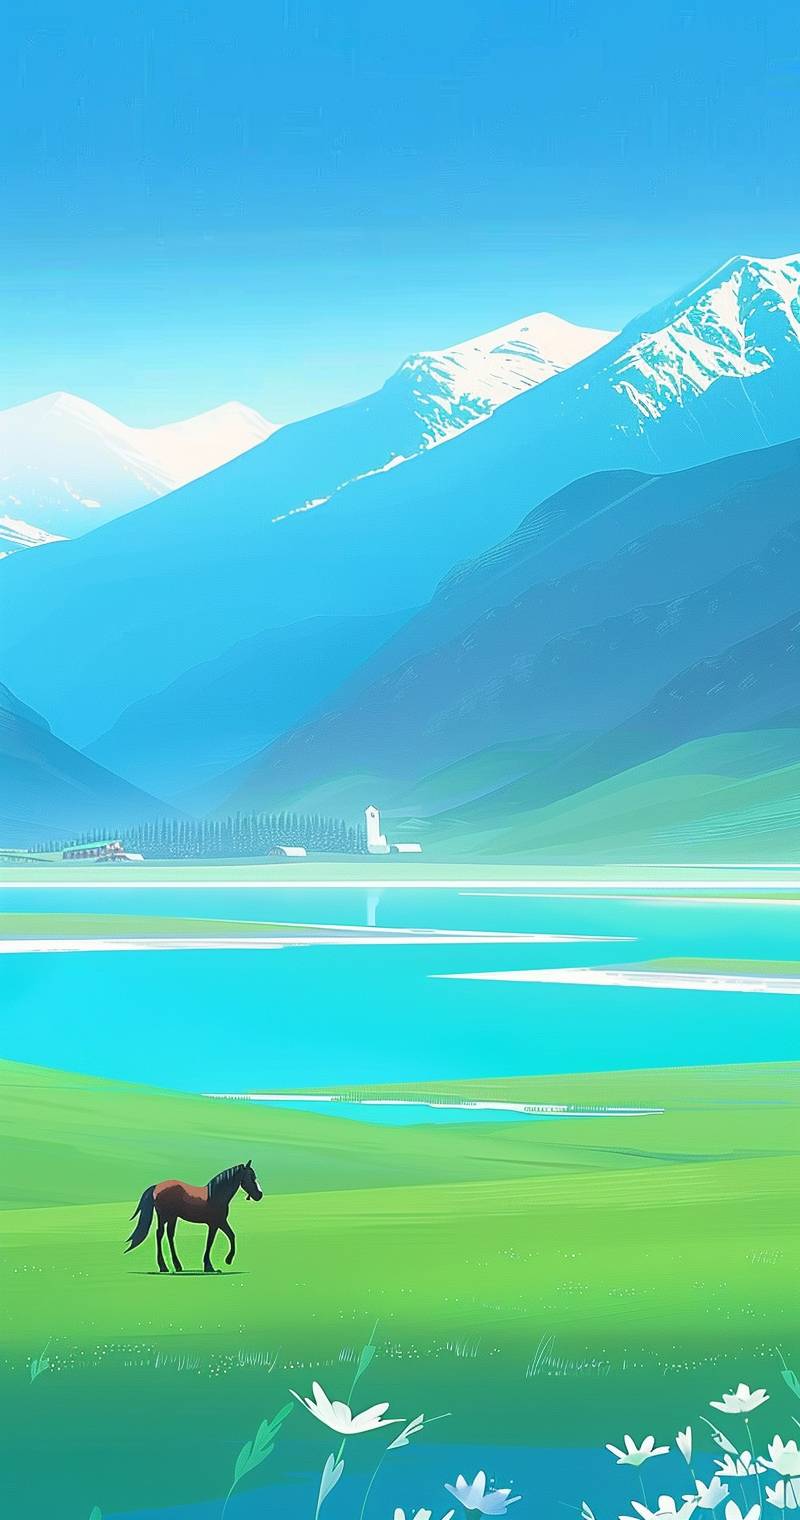 In the spring, there is green grass on both sides of the river with snowcapped mountains in the distance and a clear blue sky. A horse walks alone by the lake, surrounded by vast meadows and distant villages. The flat illustration style creates an atmosphere full of vitality. It uses bright colors to highlight fresh natural scenery. In closeup shots, you can see that it presents delicate lines and soft lighting effects. This scene seems like a picture drawn from nature itself, in the style of nature itself.